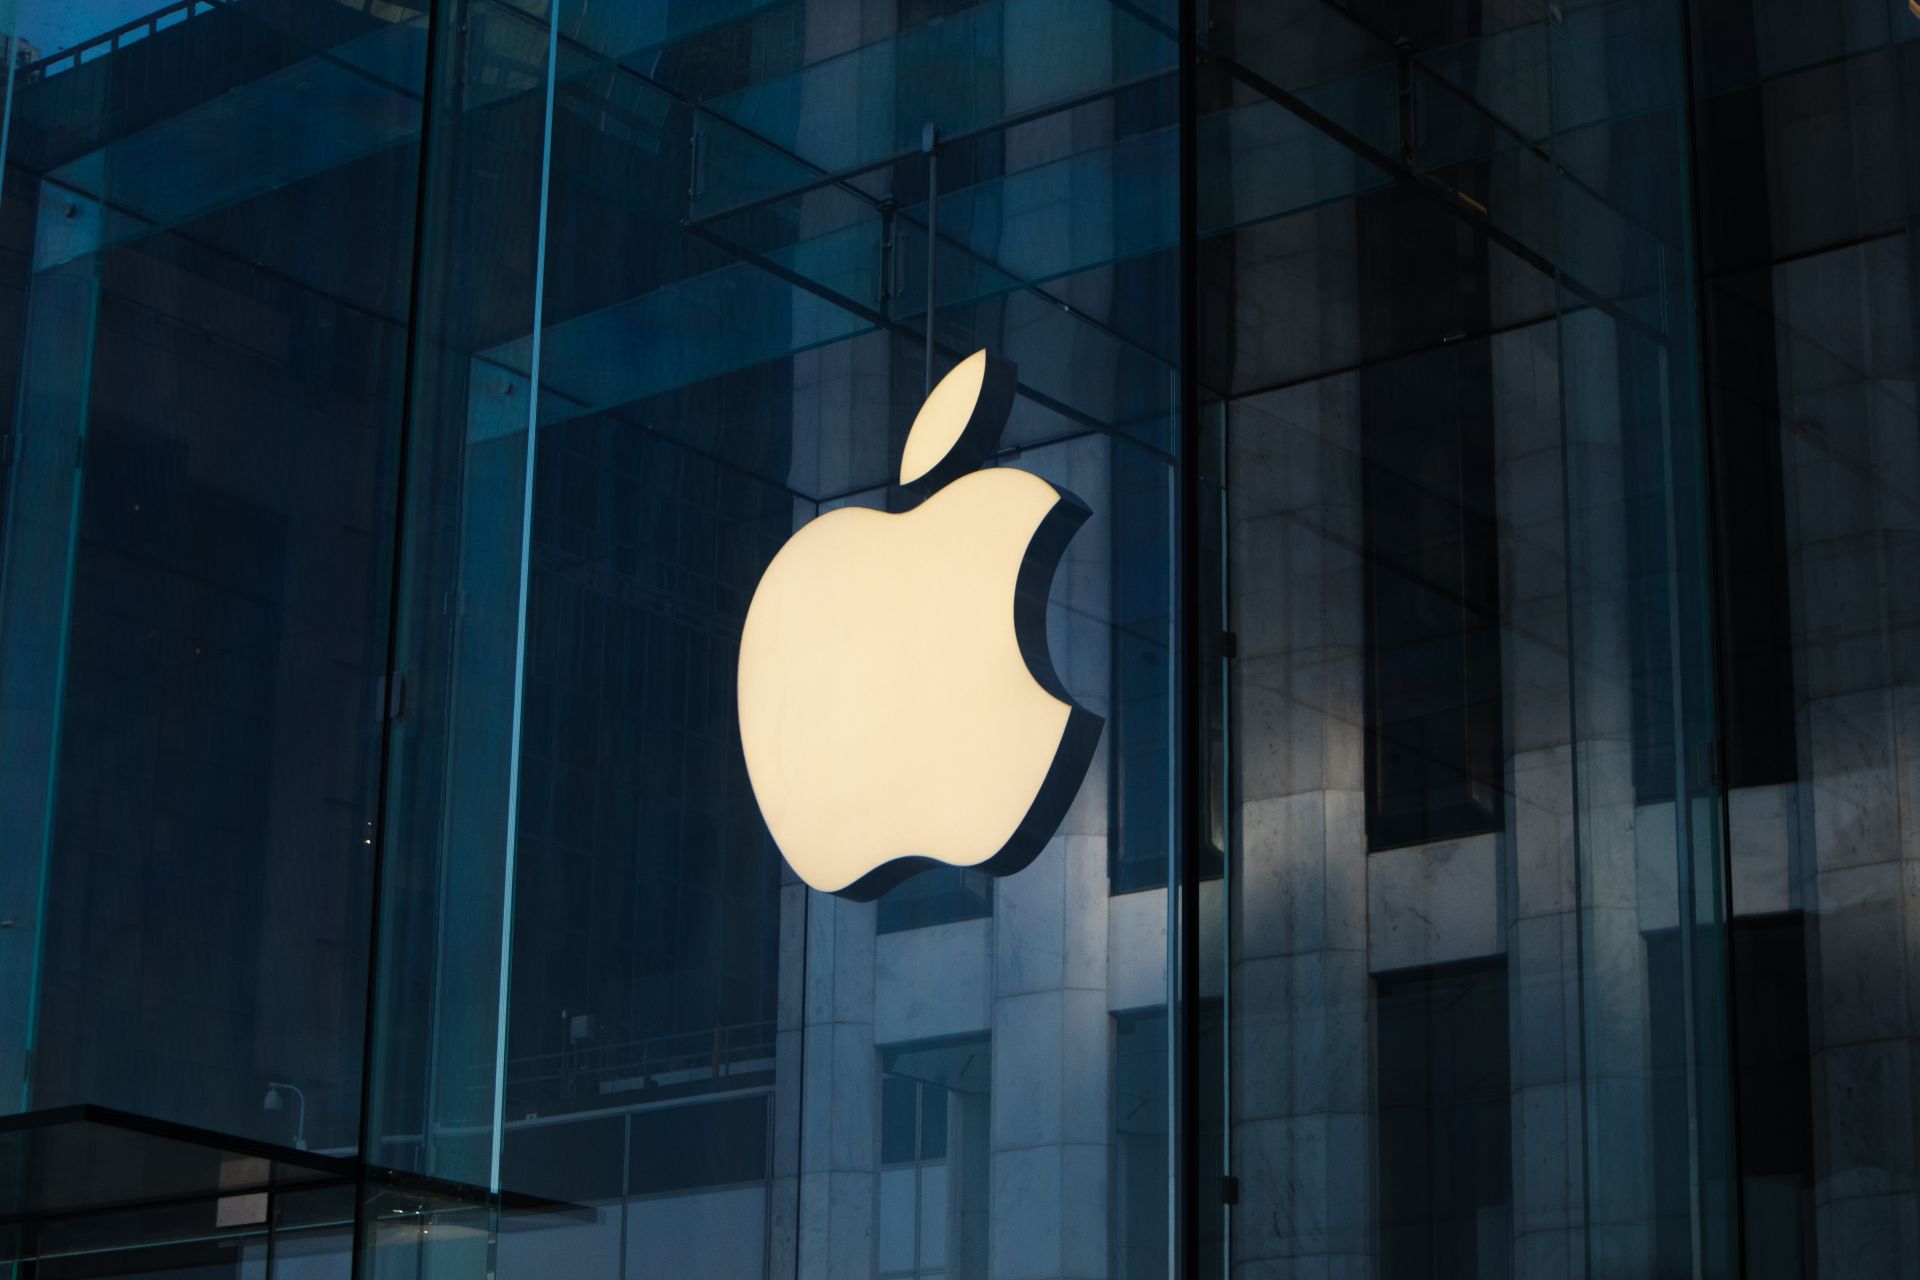 Epic might pay Apple $73.4m just for legal fees